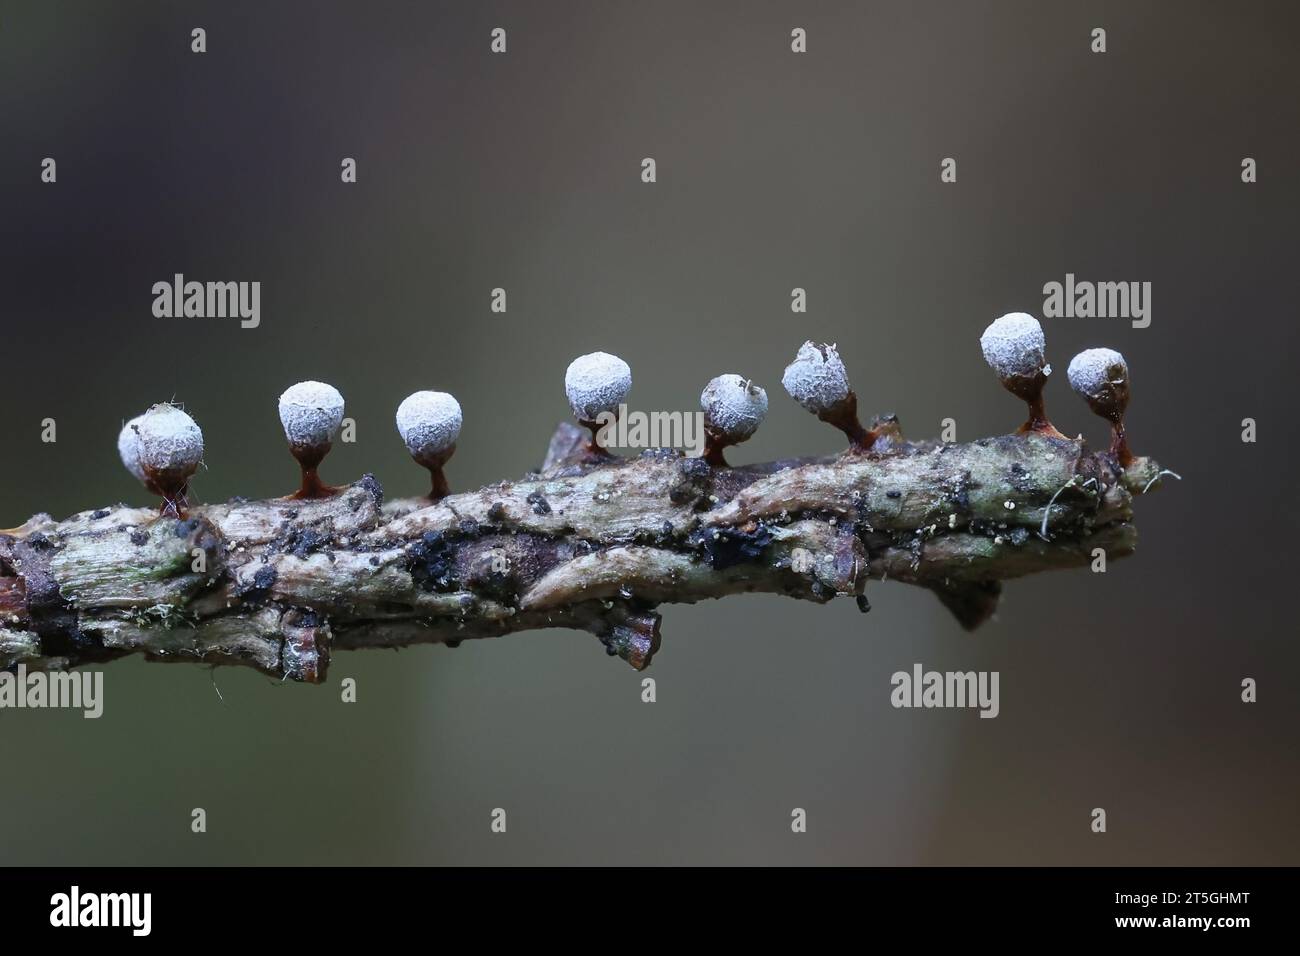 Craterium leucocephalum, a slime mold from Finland, no common english name Stock Photo